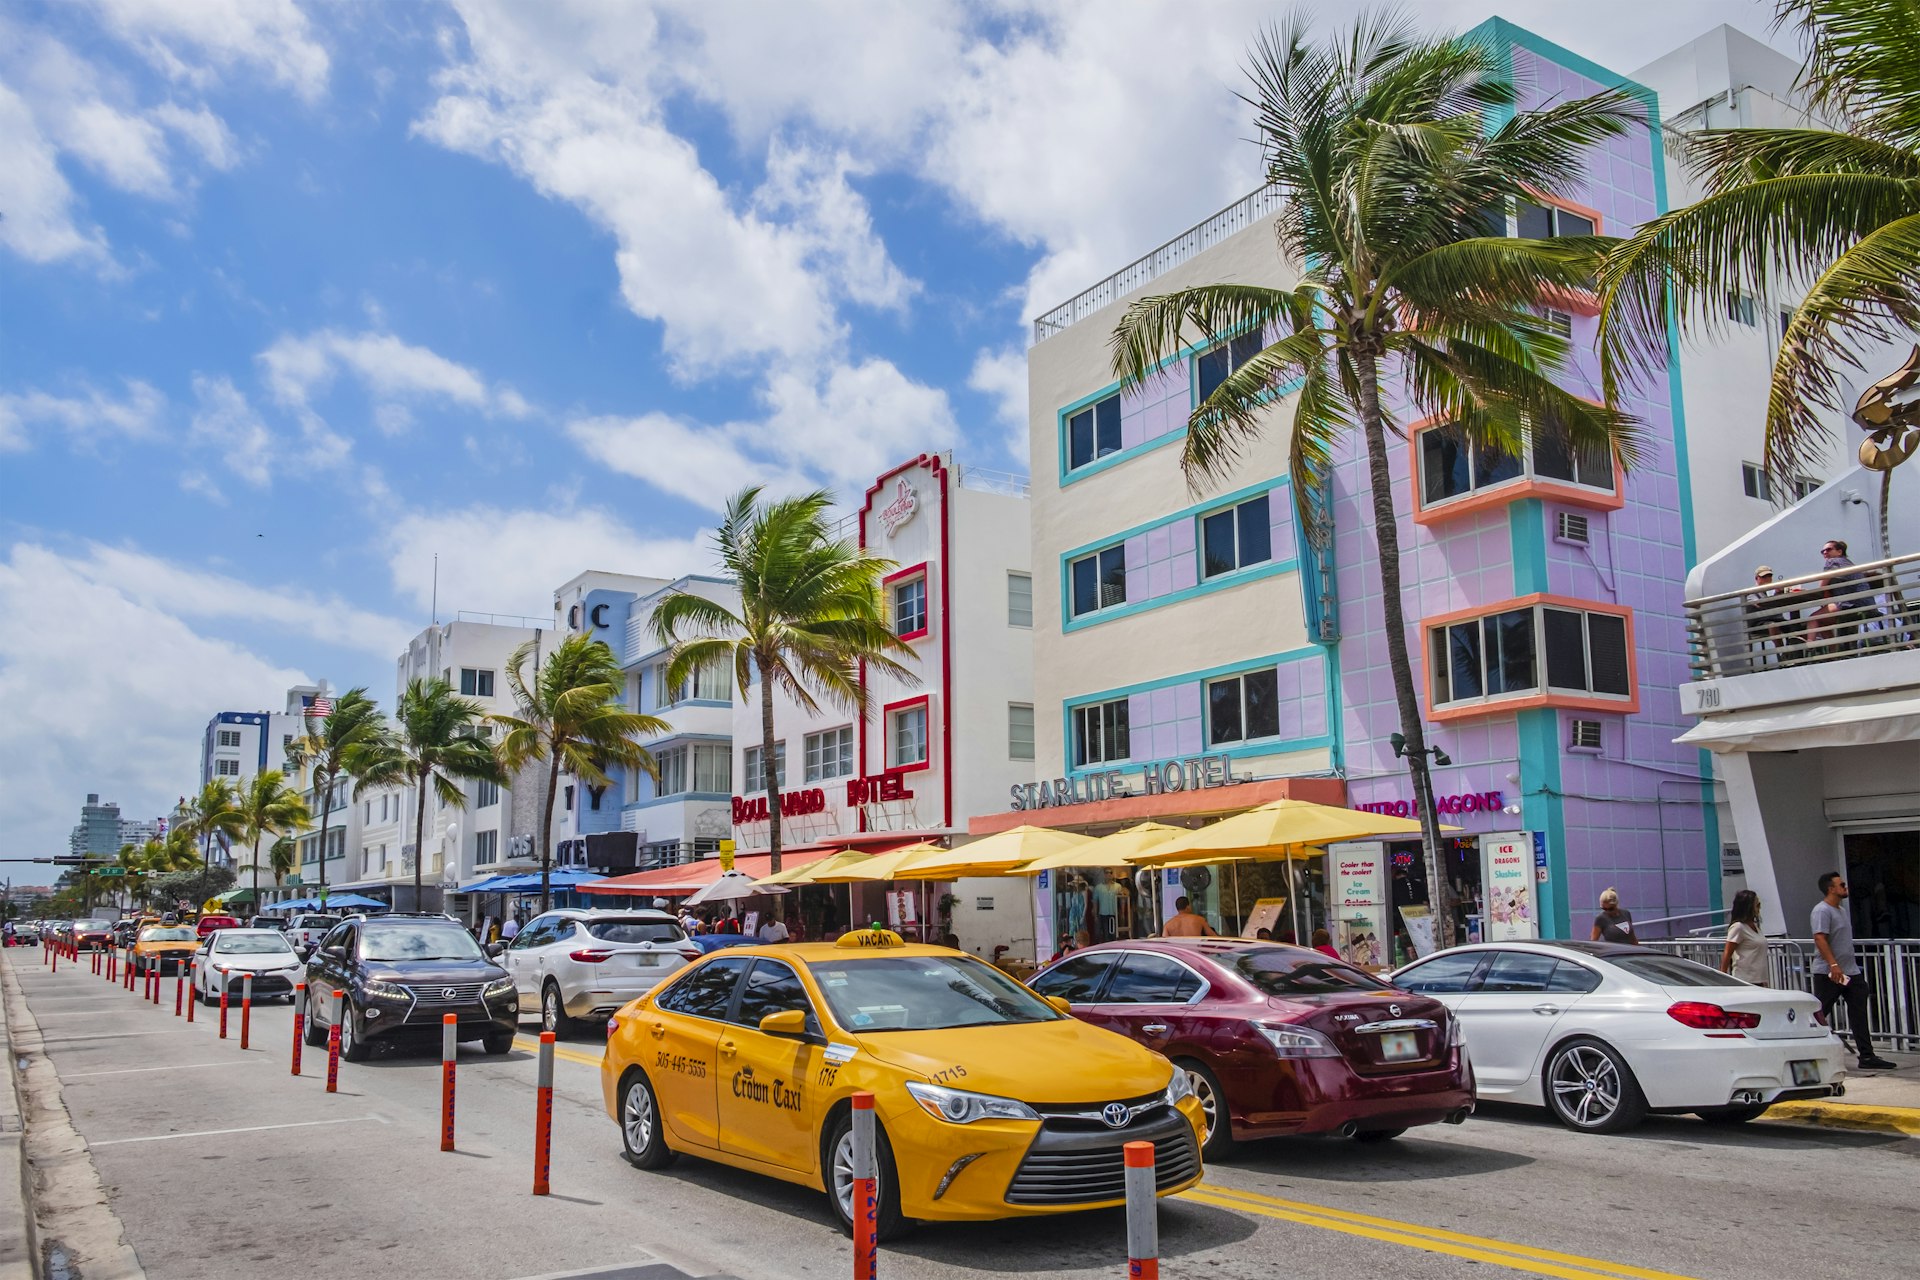 A bright yellow taxi is at the front of a line of cars driving along Ocean Drive in Miami, where tall palm trees stand in front of art deco buildings